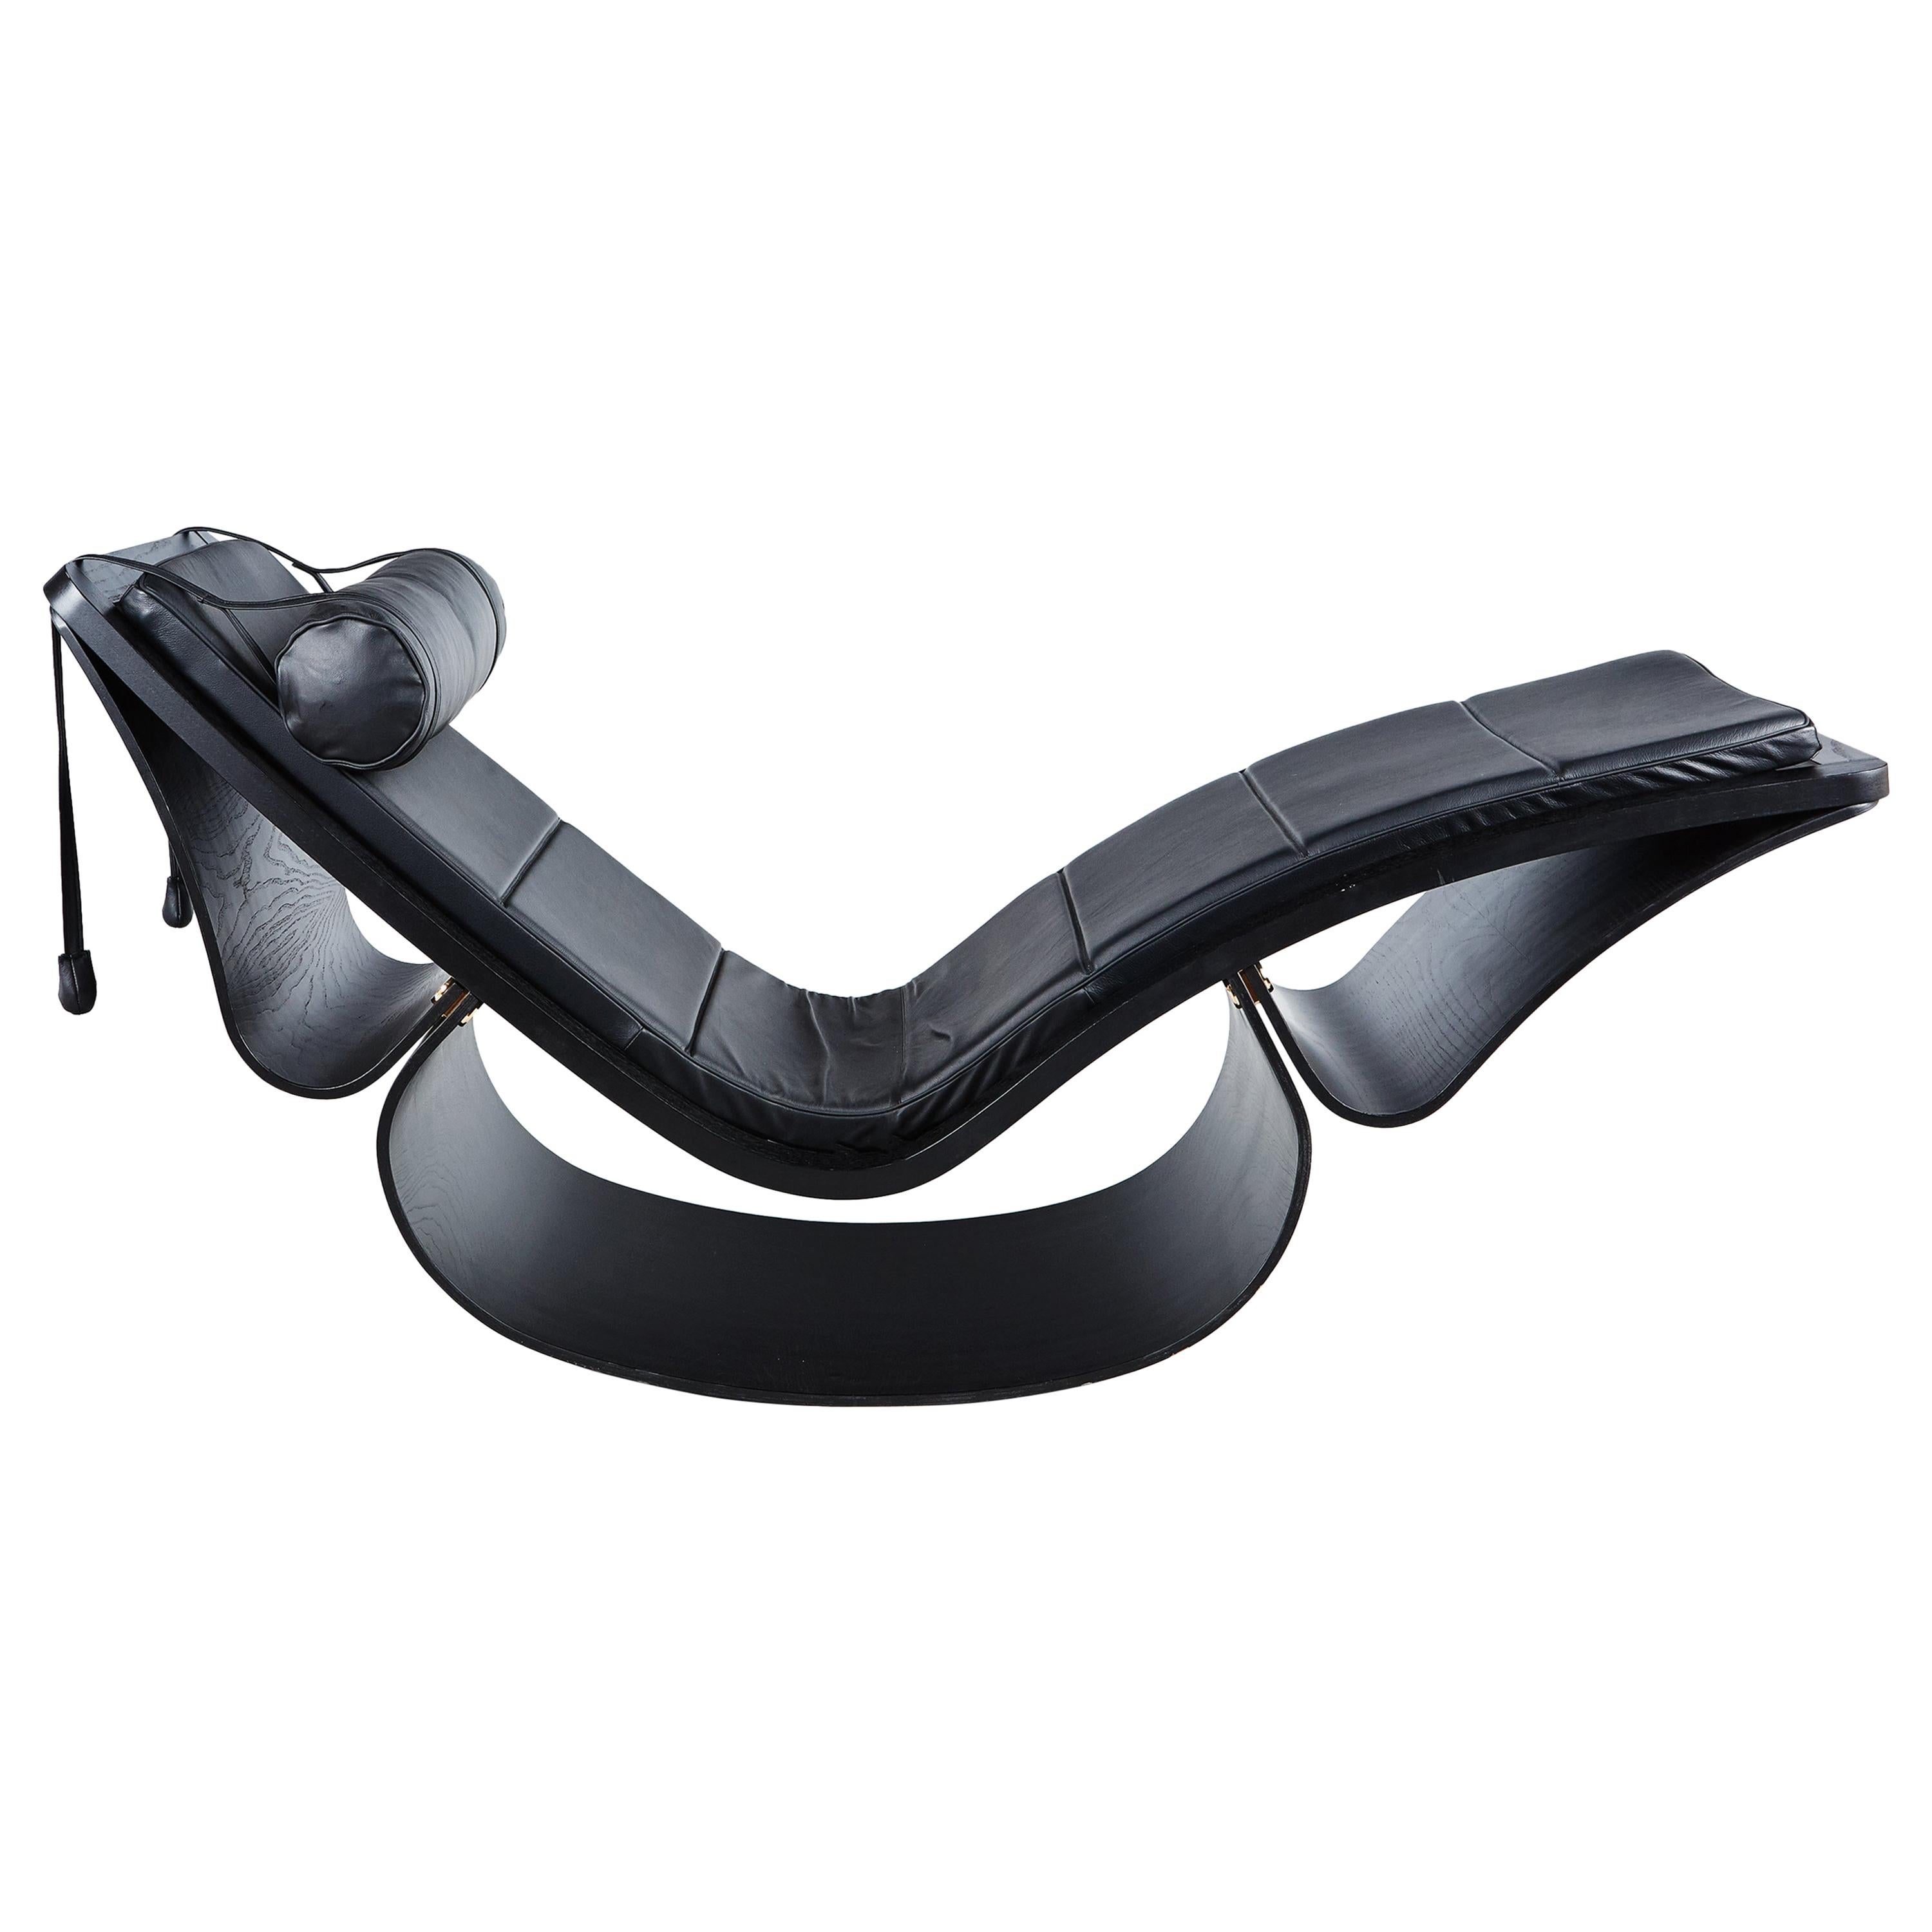 Iconic "Rio" Chaise Longue Designed by Oscar Niemeyer and Daughter Anna Maria For Sale